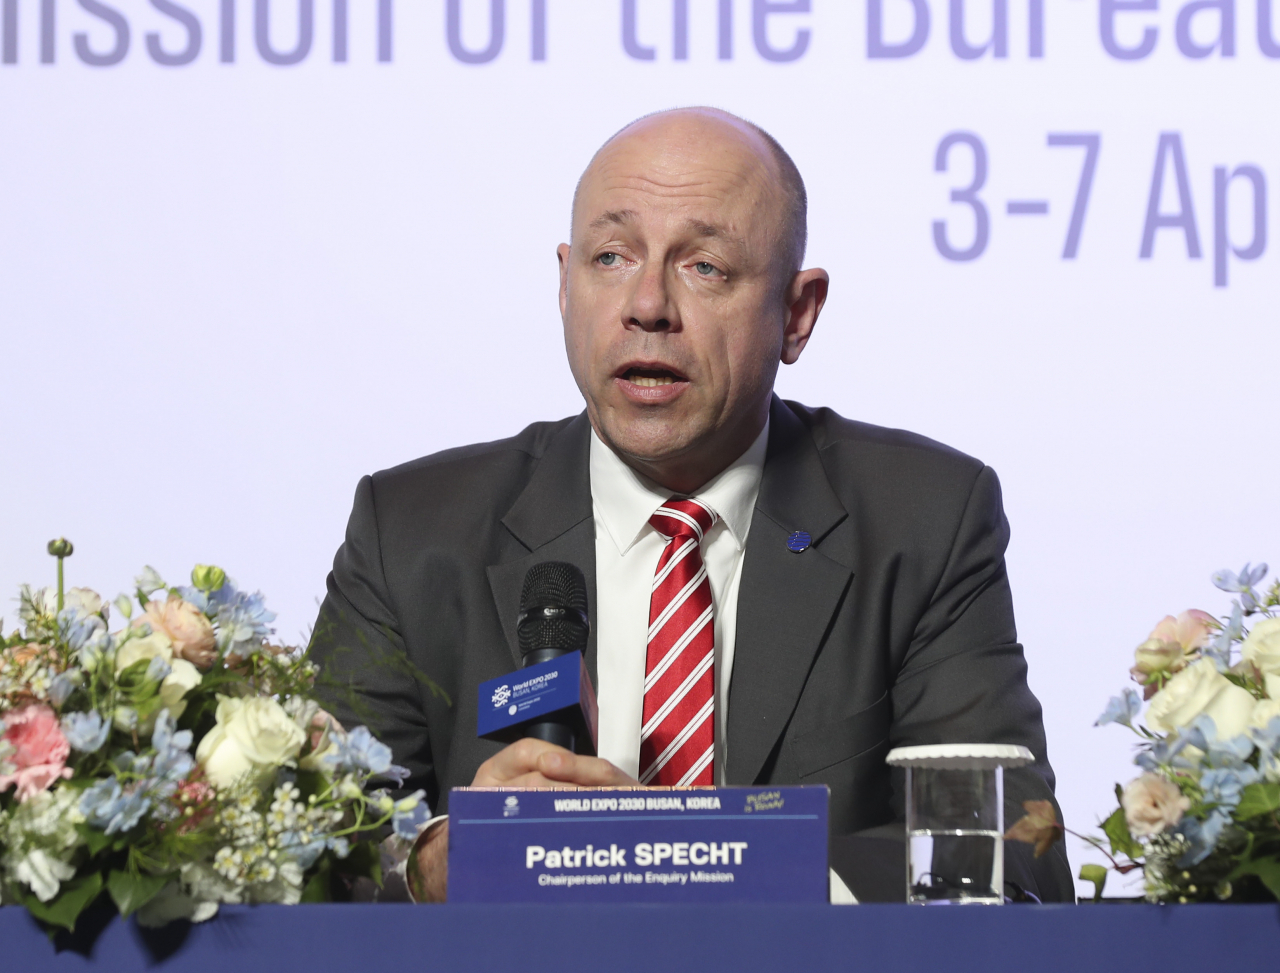 Patrick Specht, president of the Bureau International des Expositions Administration and Budget Committee, speaks during a press conference held in Signiel Busan Thursday. (Yonhap)